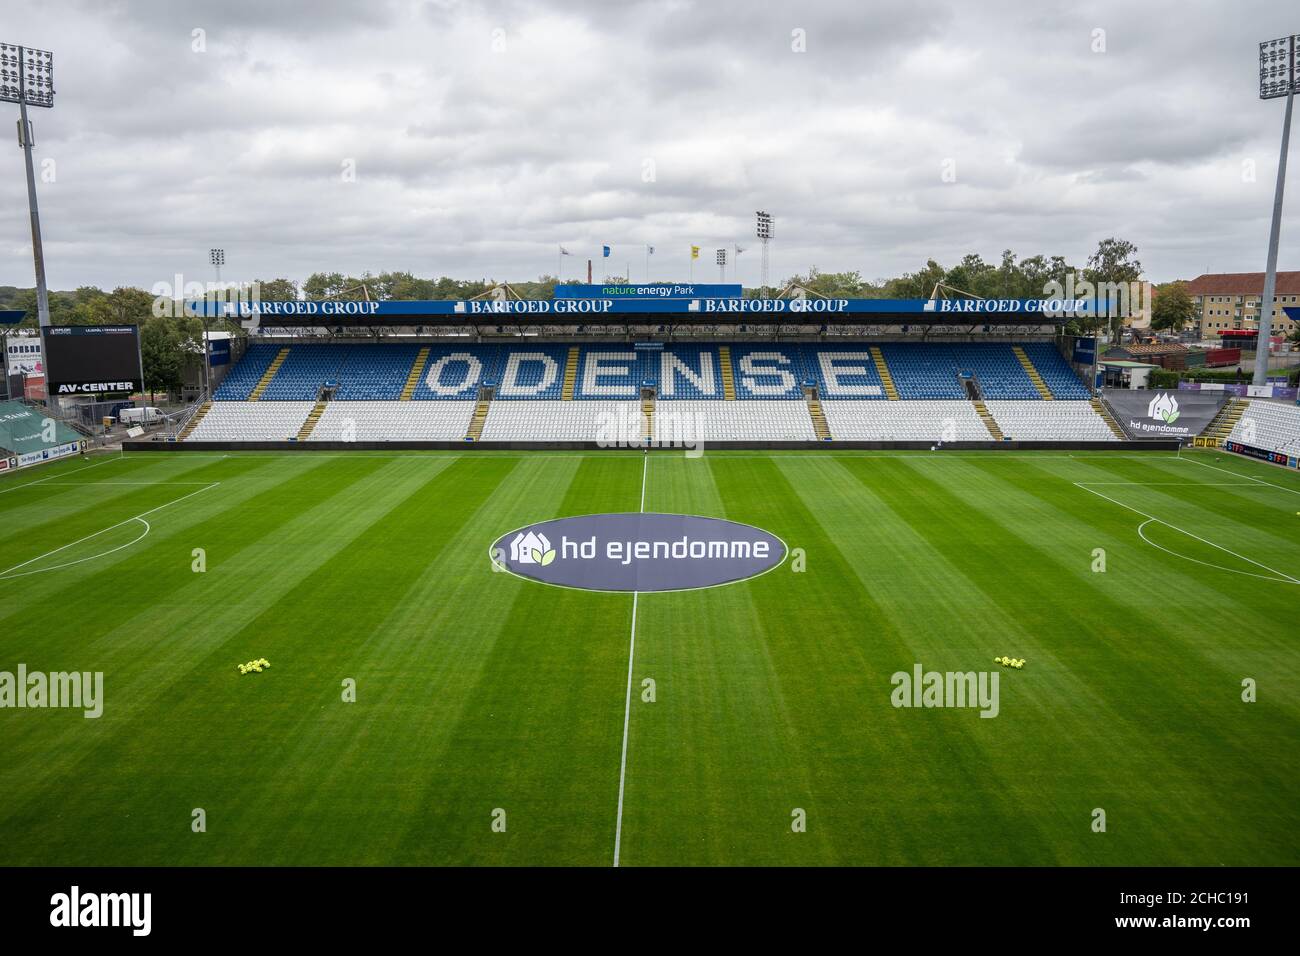 Odense, Denmark. 13th Sep, The stadium Nature Park is ready for 3F Superliga